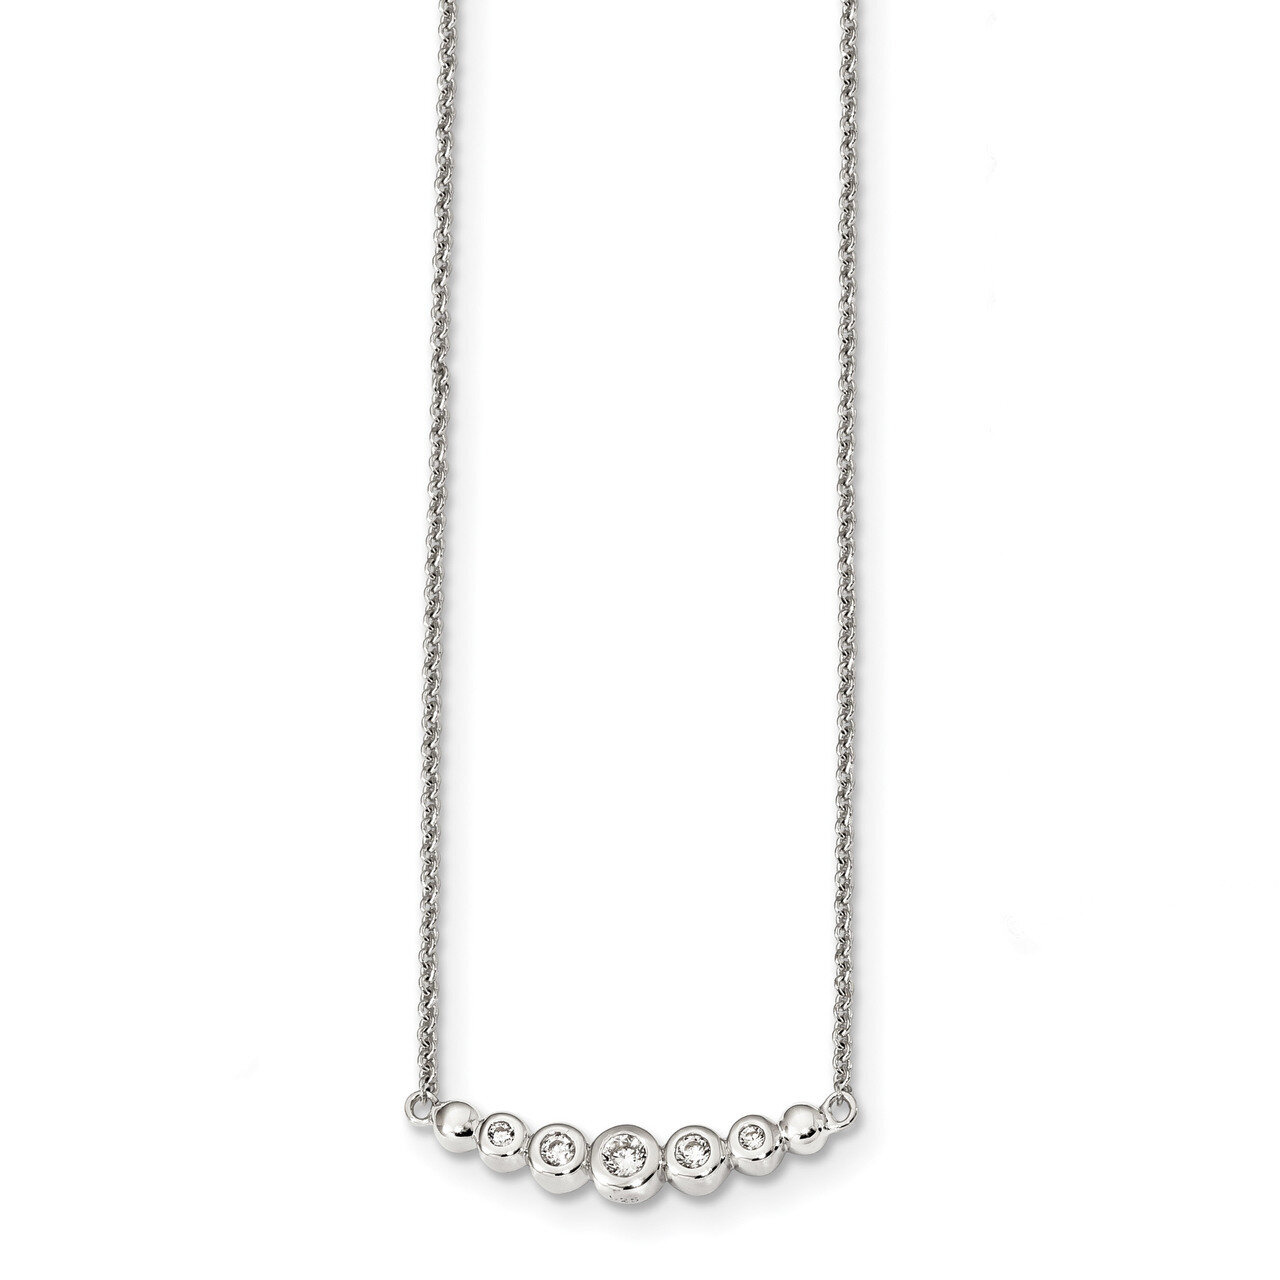 Garduated CZ Diamond Bar Necklace 18 Inch Sterling Silver QG4293-18